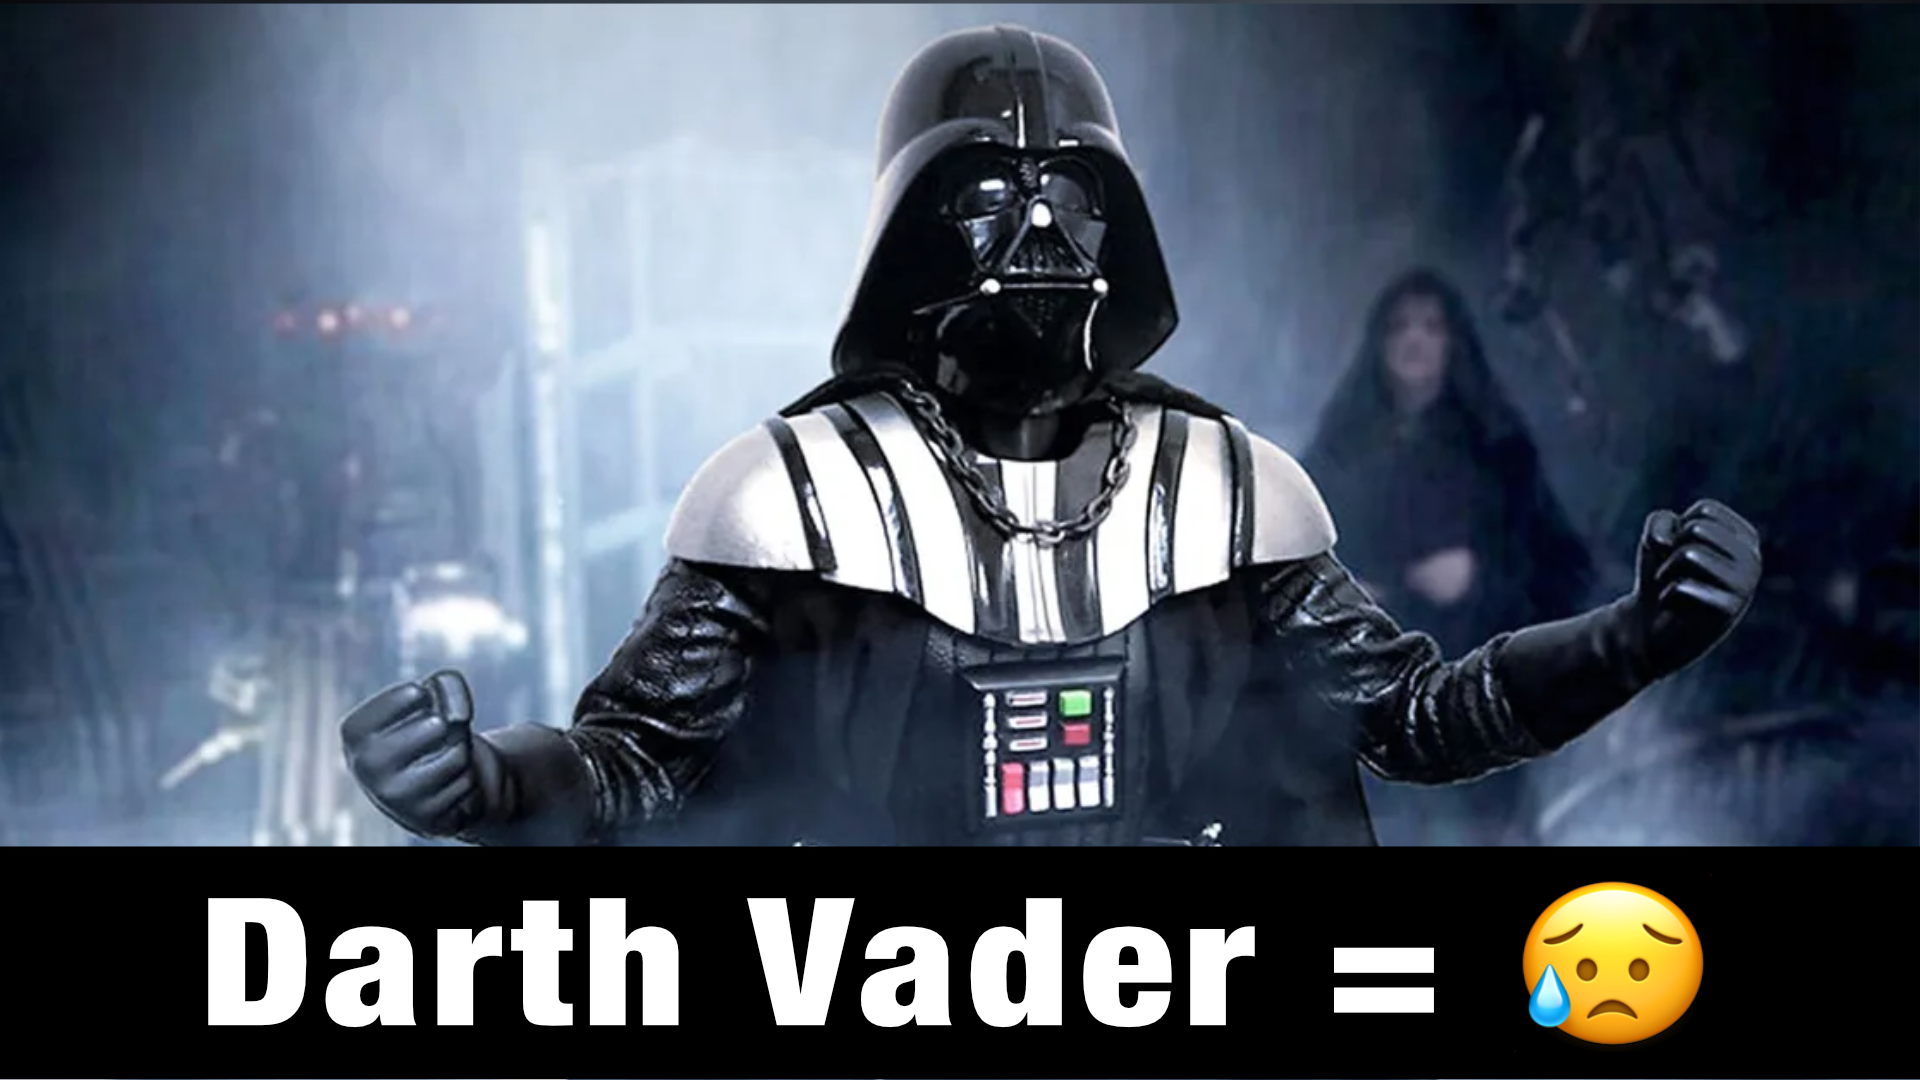 Darth Vader Theme - But he is Sad